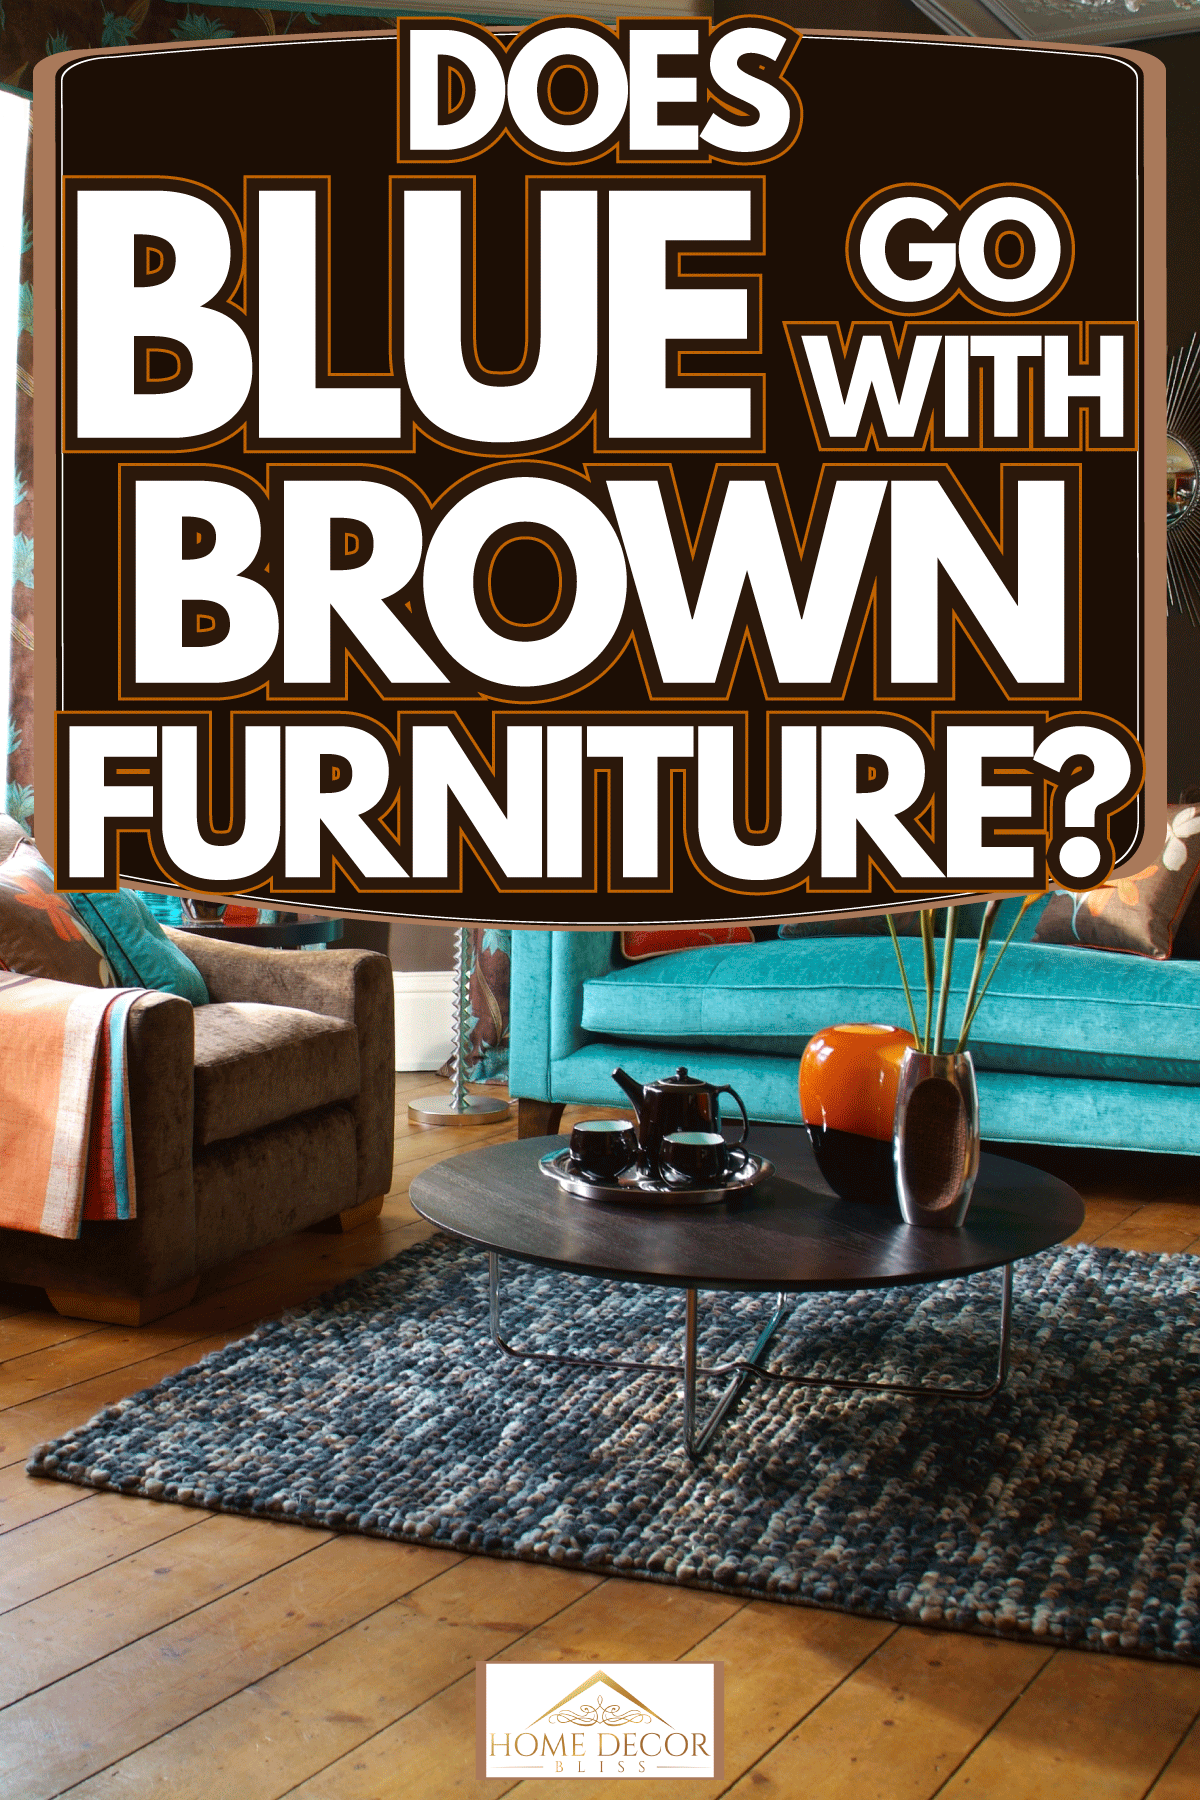 Wooden flooring of a living room with brown and blue sofa with bright colored throw pillows, Does Blue Go With Brown Furniture?